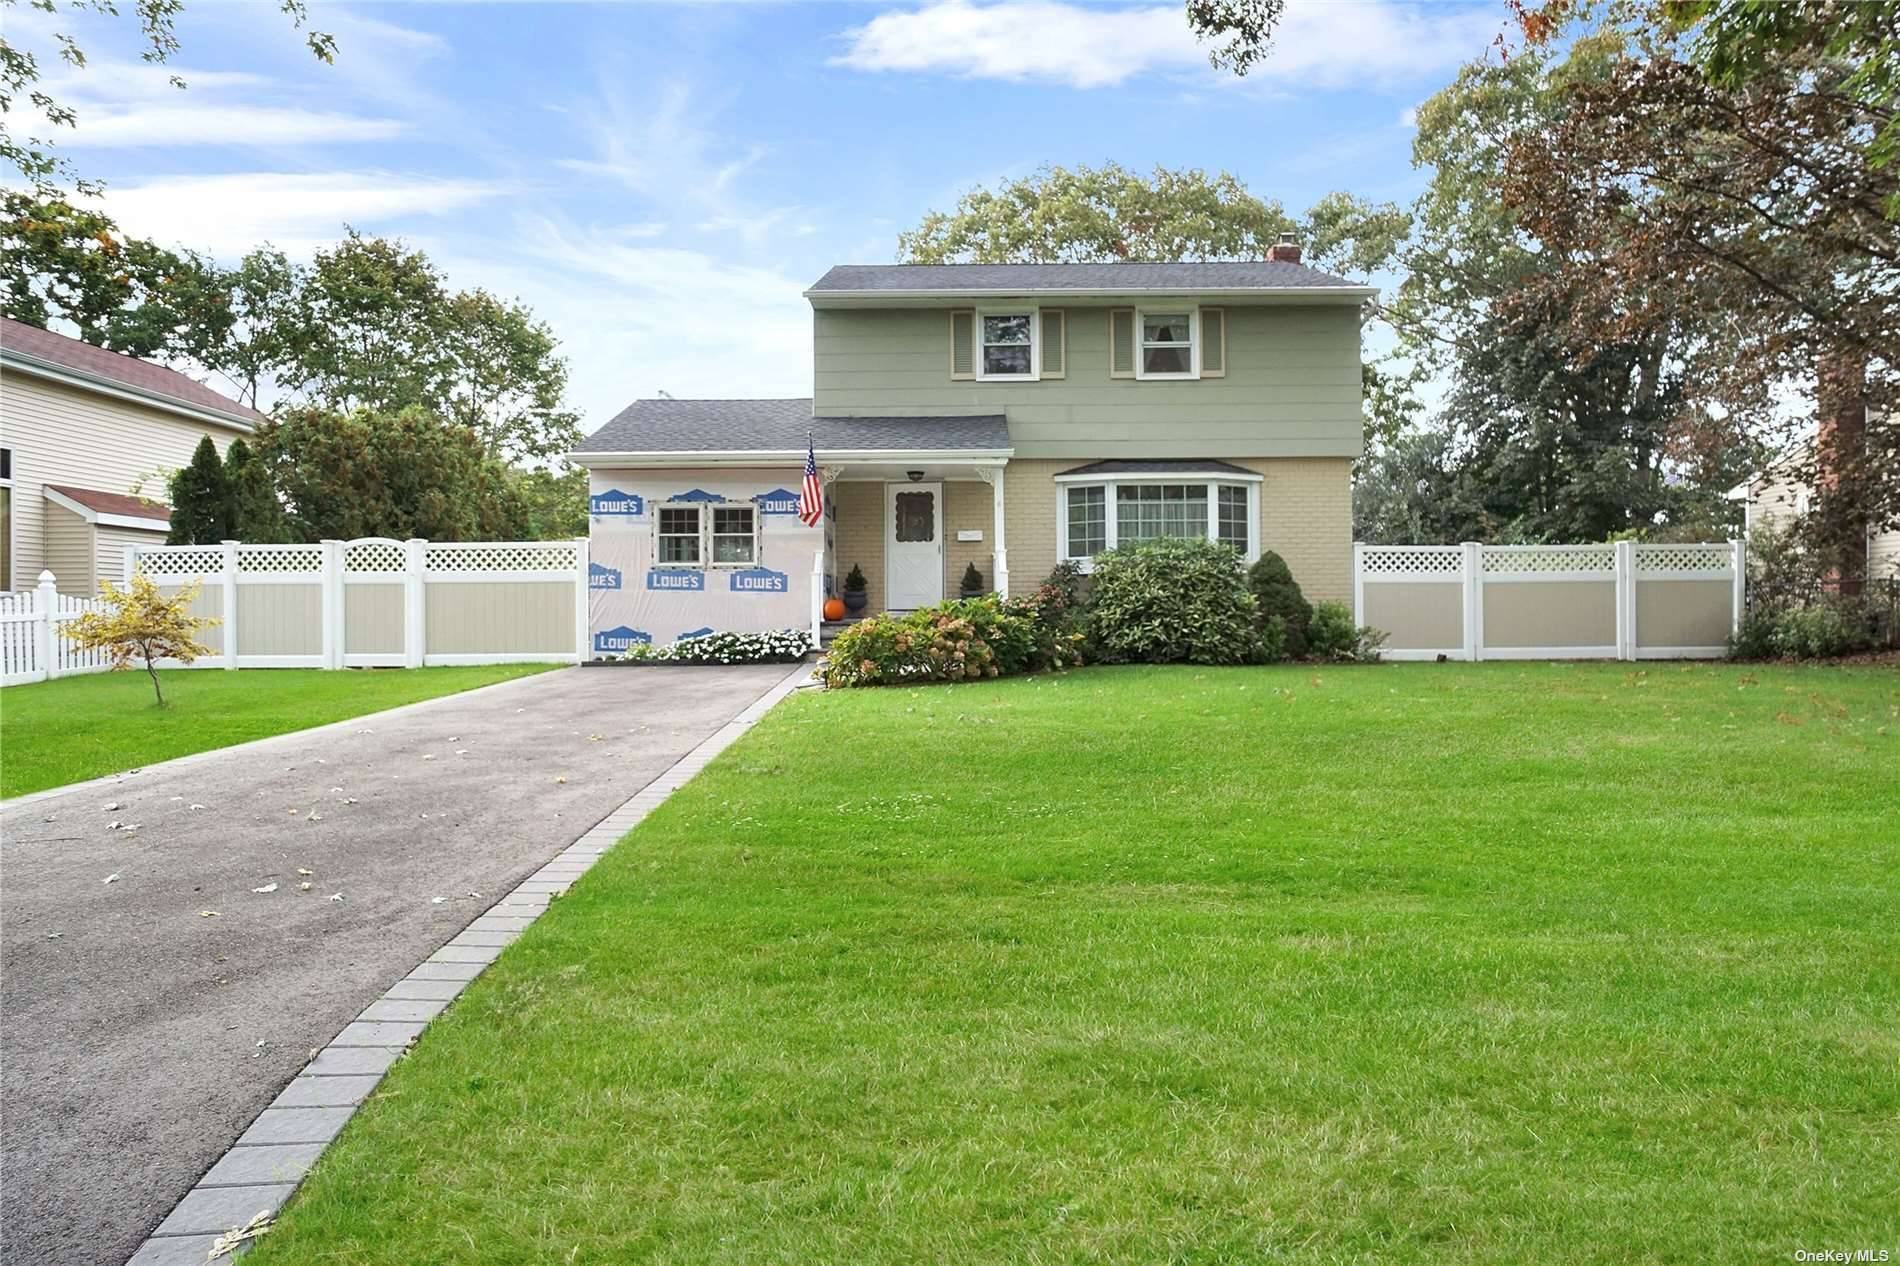 Nice Colonial with Wood Floors Large Deck in Rear Yard Desirable Bedroom Sizes and Nicely added Unfinished Family Room waiting for Buyer to Finish Gas Cooking and Gas Heat Roof ...